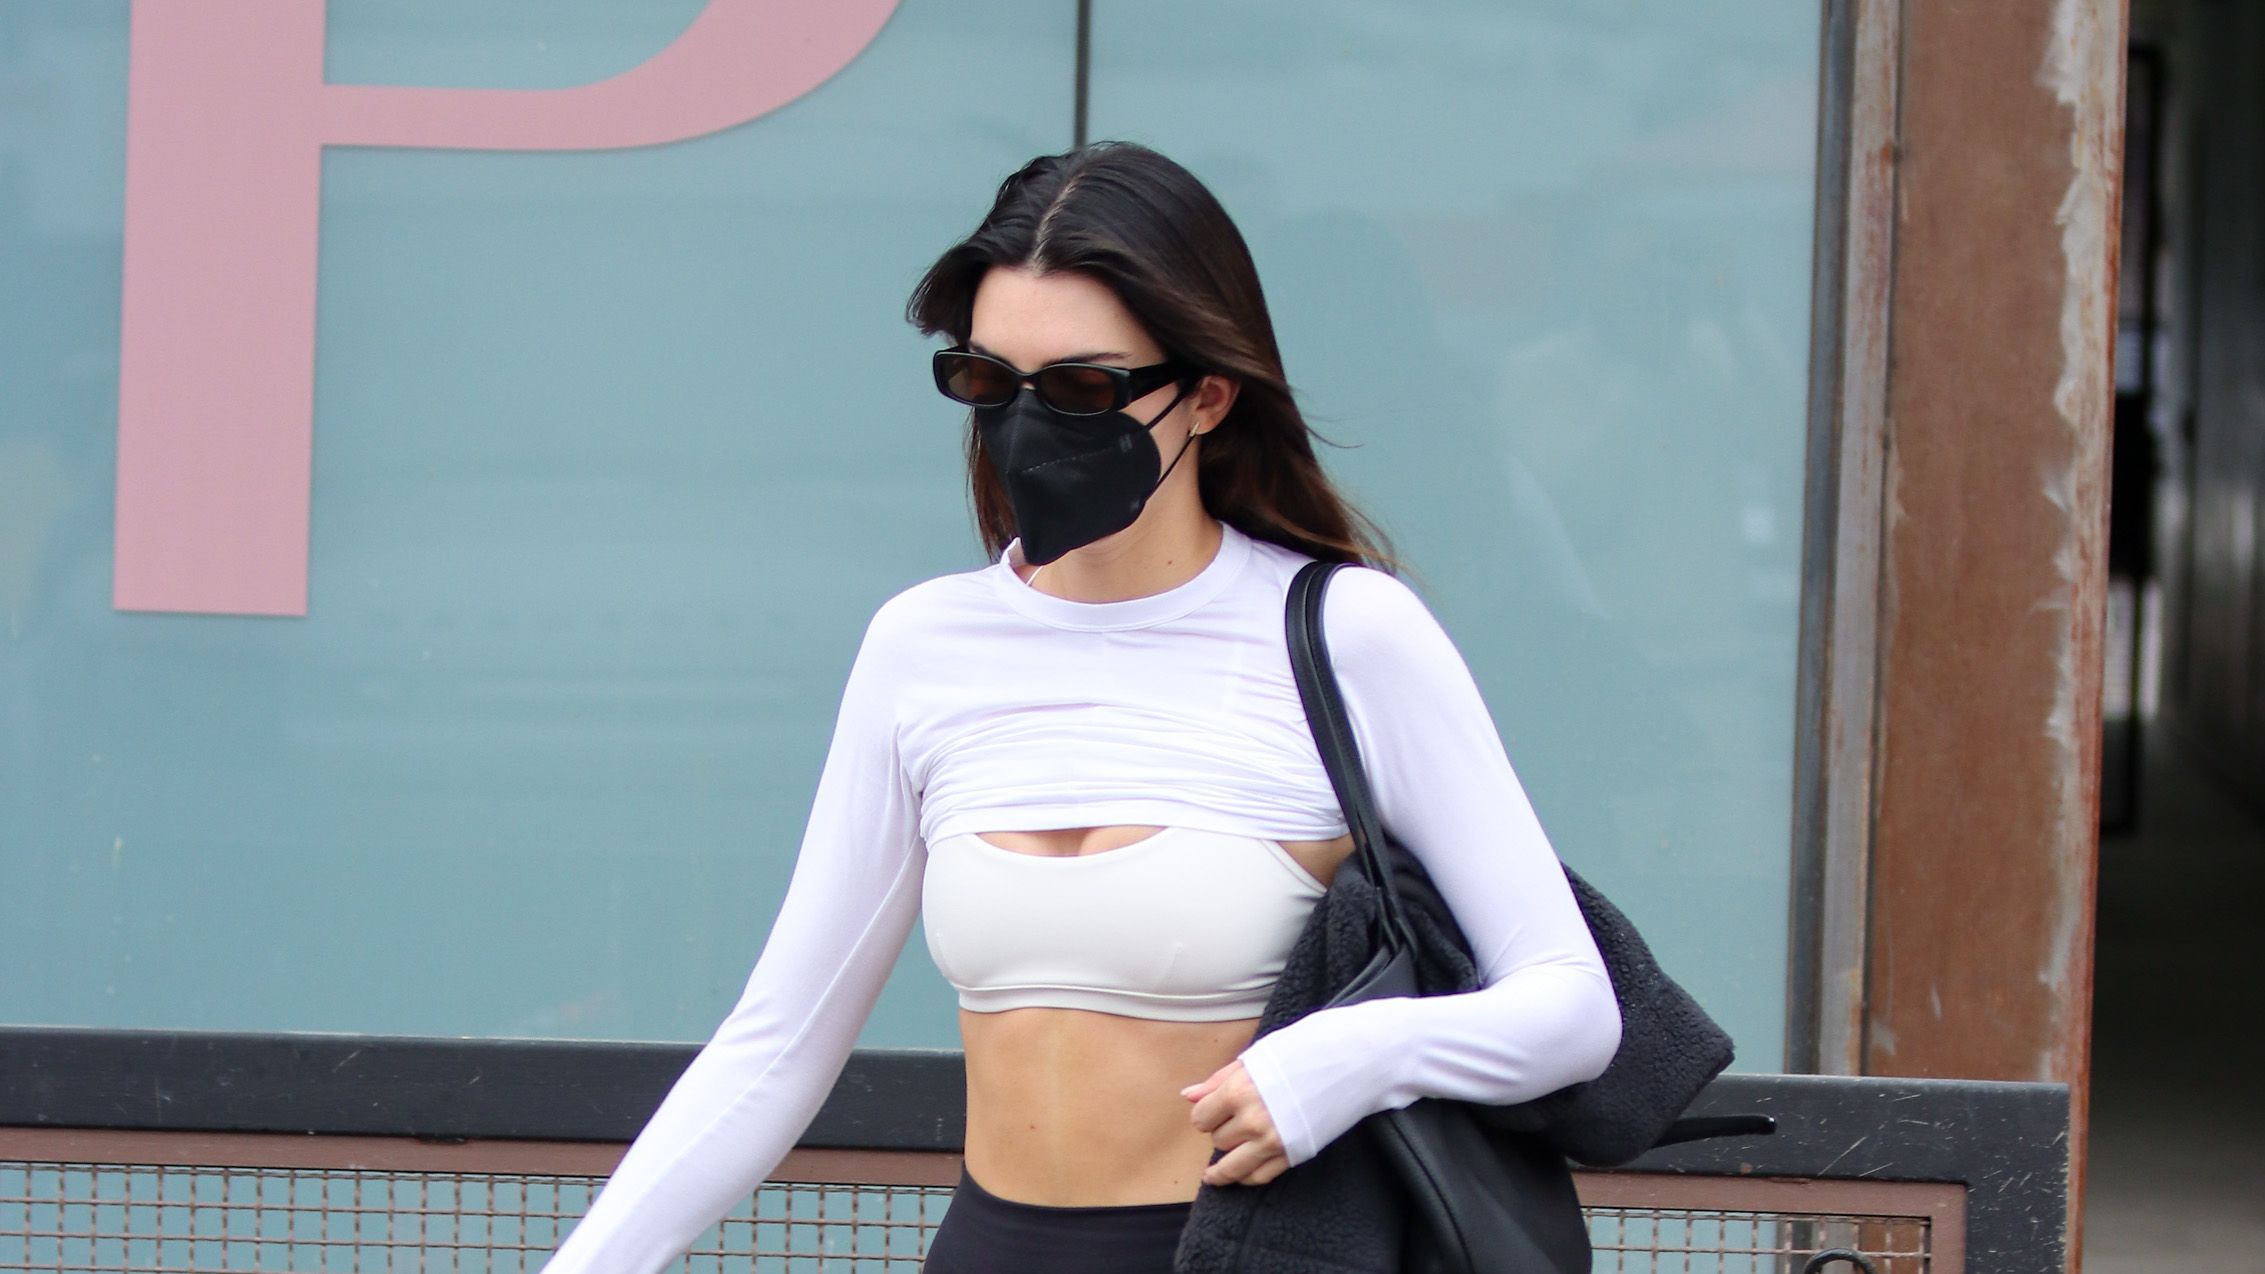 Kendall Jenner and Hailey Bieber Hang at Pilates in Sports Bras